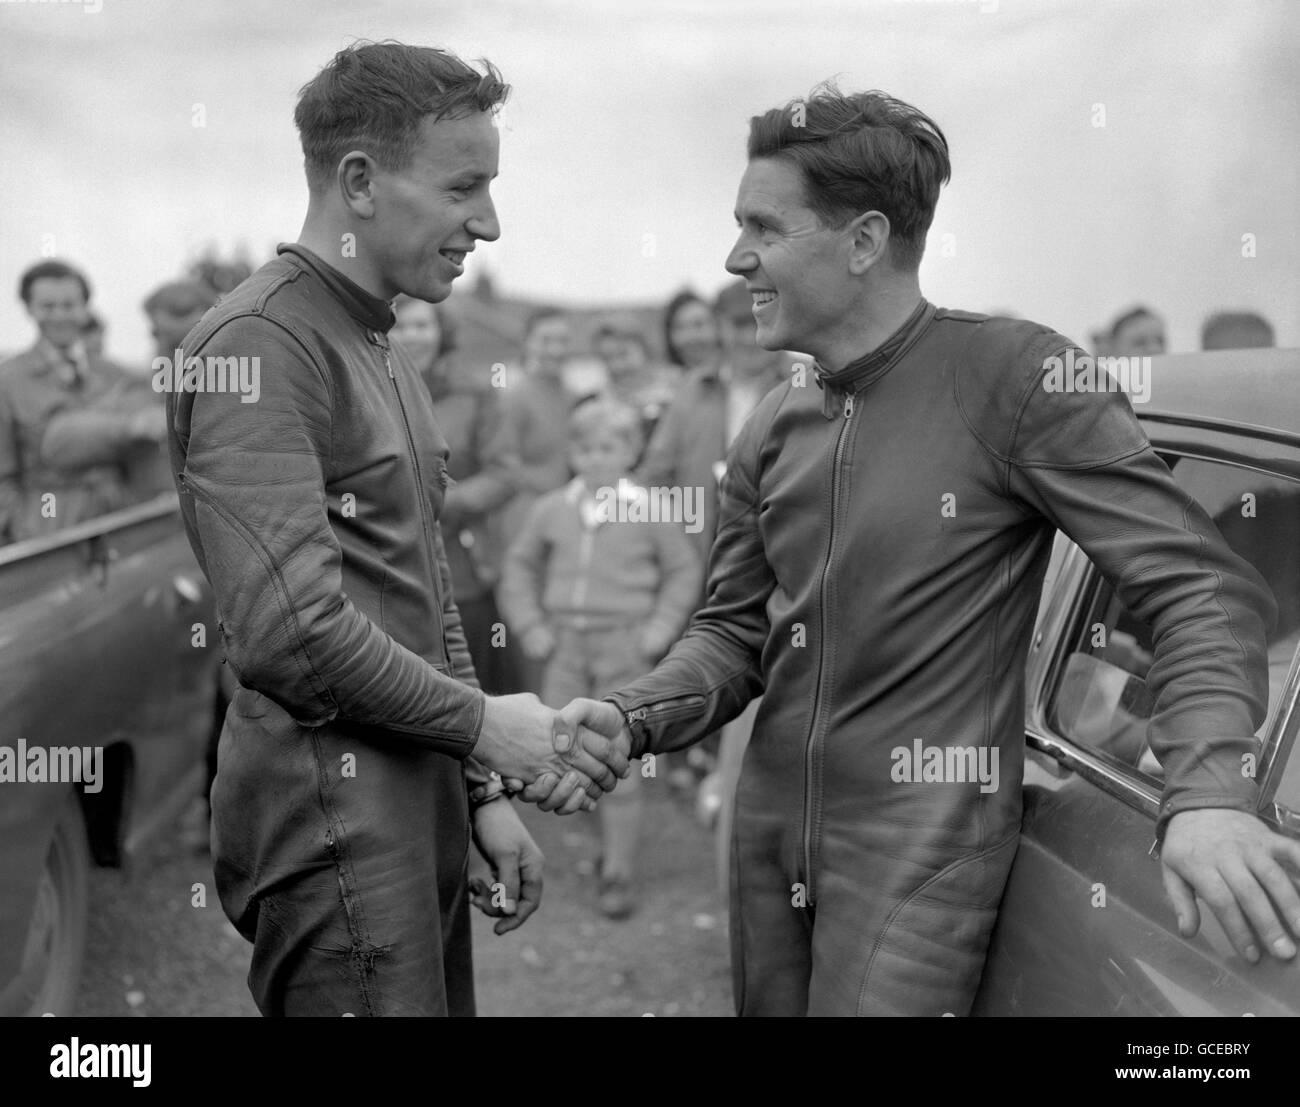 World motorcycle champion, Geoff Duke (r), congratulates 21-year-old John Surtees after he was beaten by the youngster at Brands Hatch. Surtees, riding a Norton, triumphed in an exciting duel during the non-championship event. Stock Photo